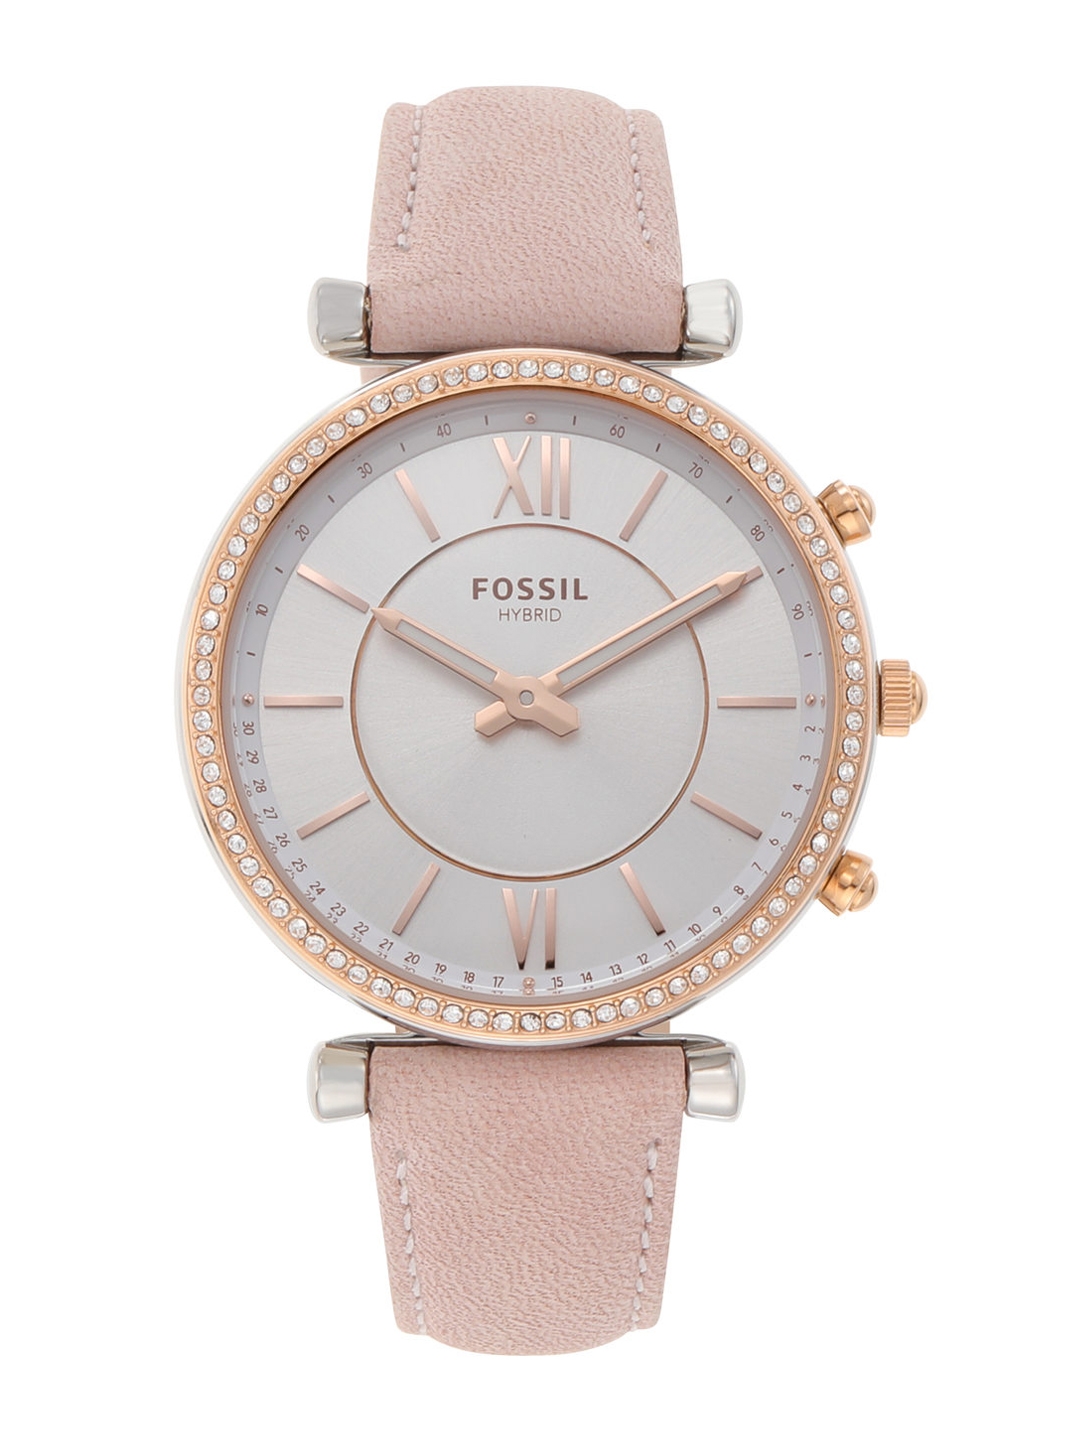 Fossil Carlie Women Pink Leather Analog Hybrid Watch FTW5039